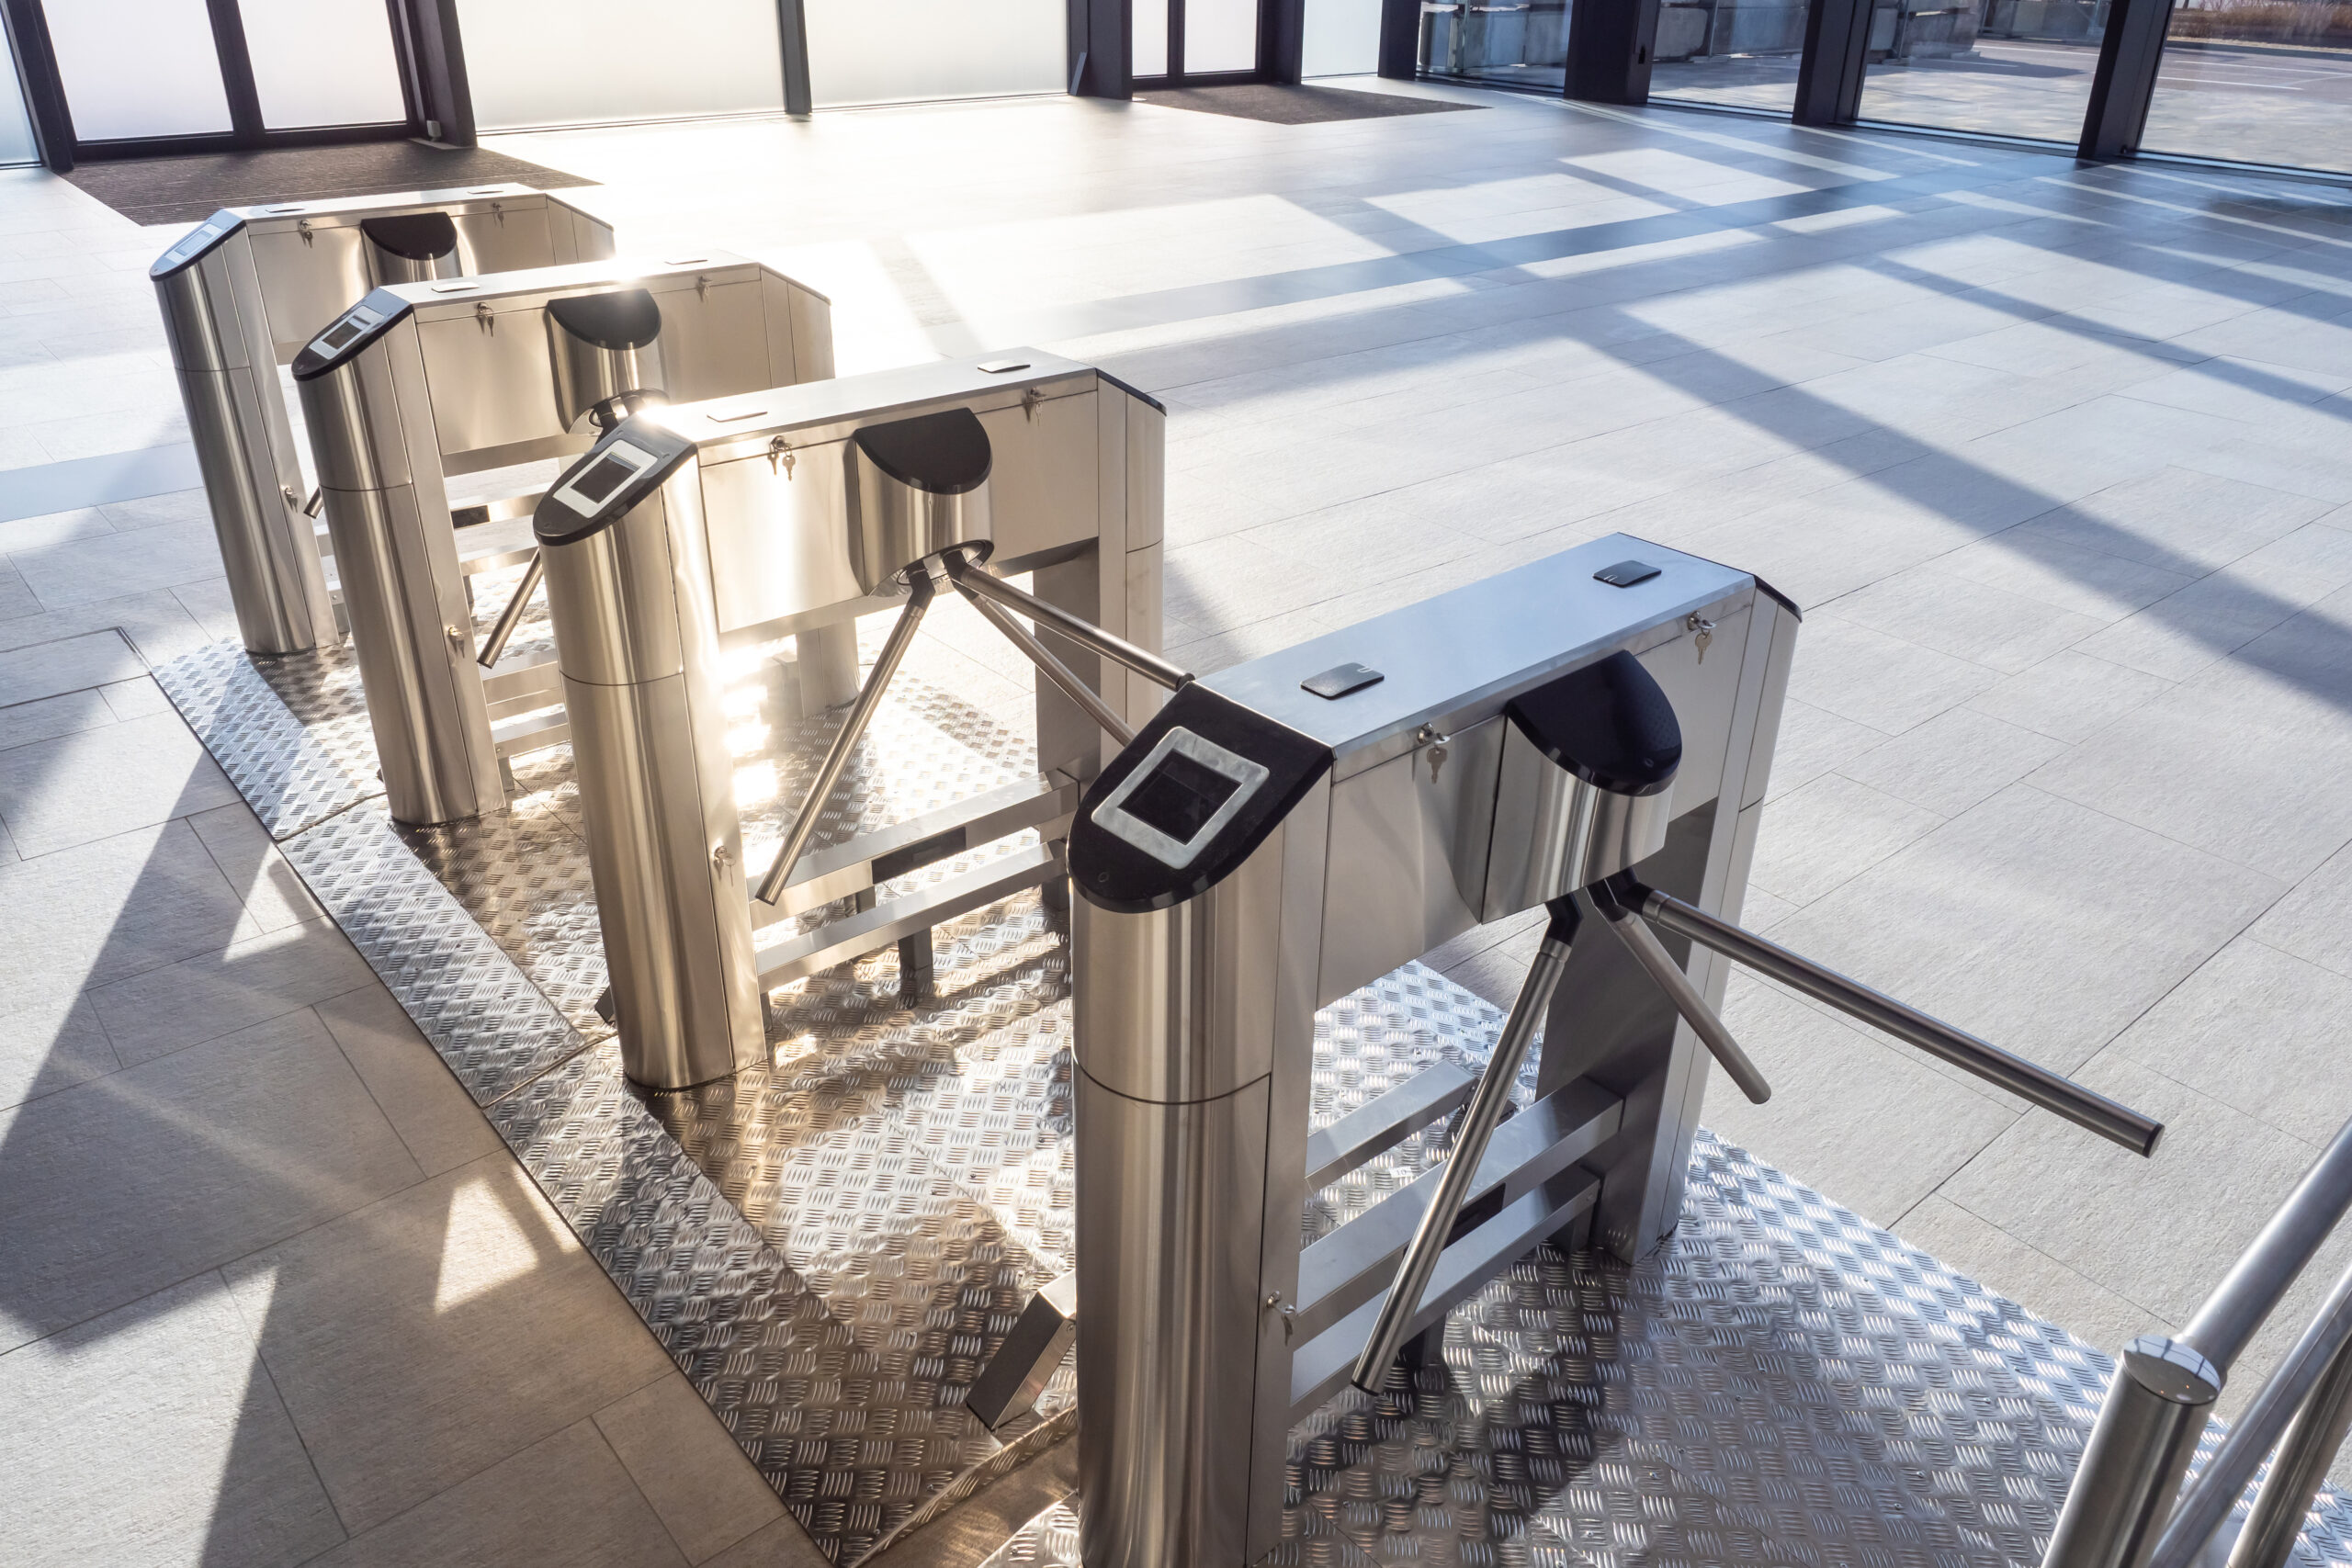 Electronic,Turnstile.,Access,System,To,The,Building.,Pass,Through,The